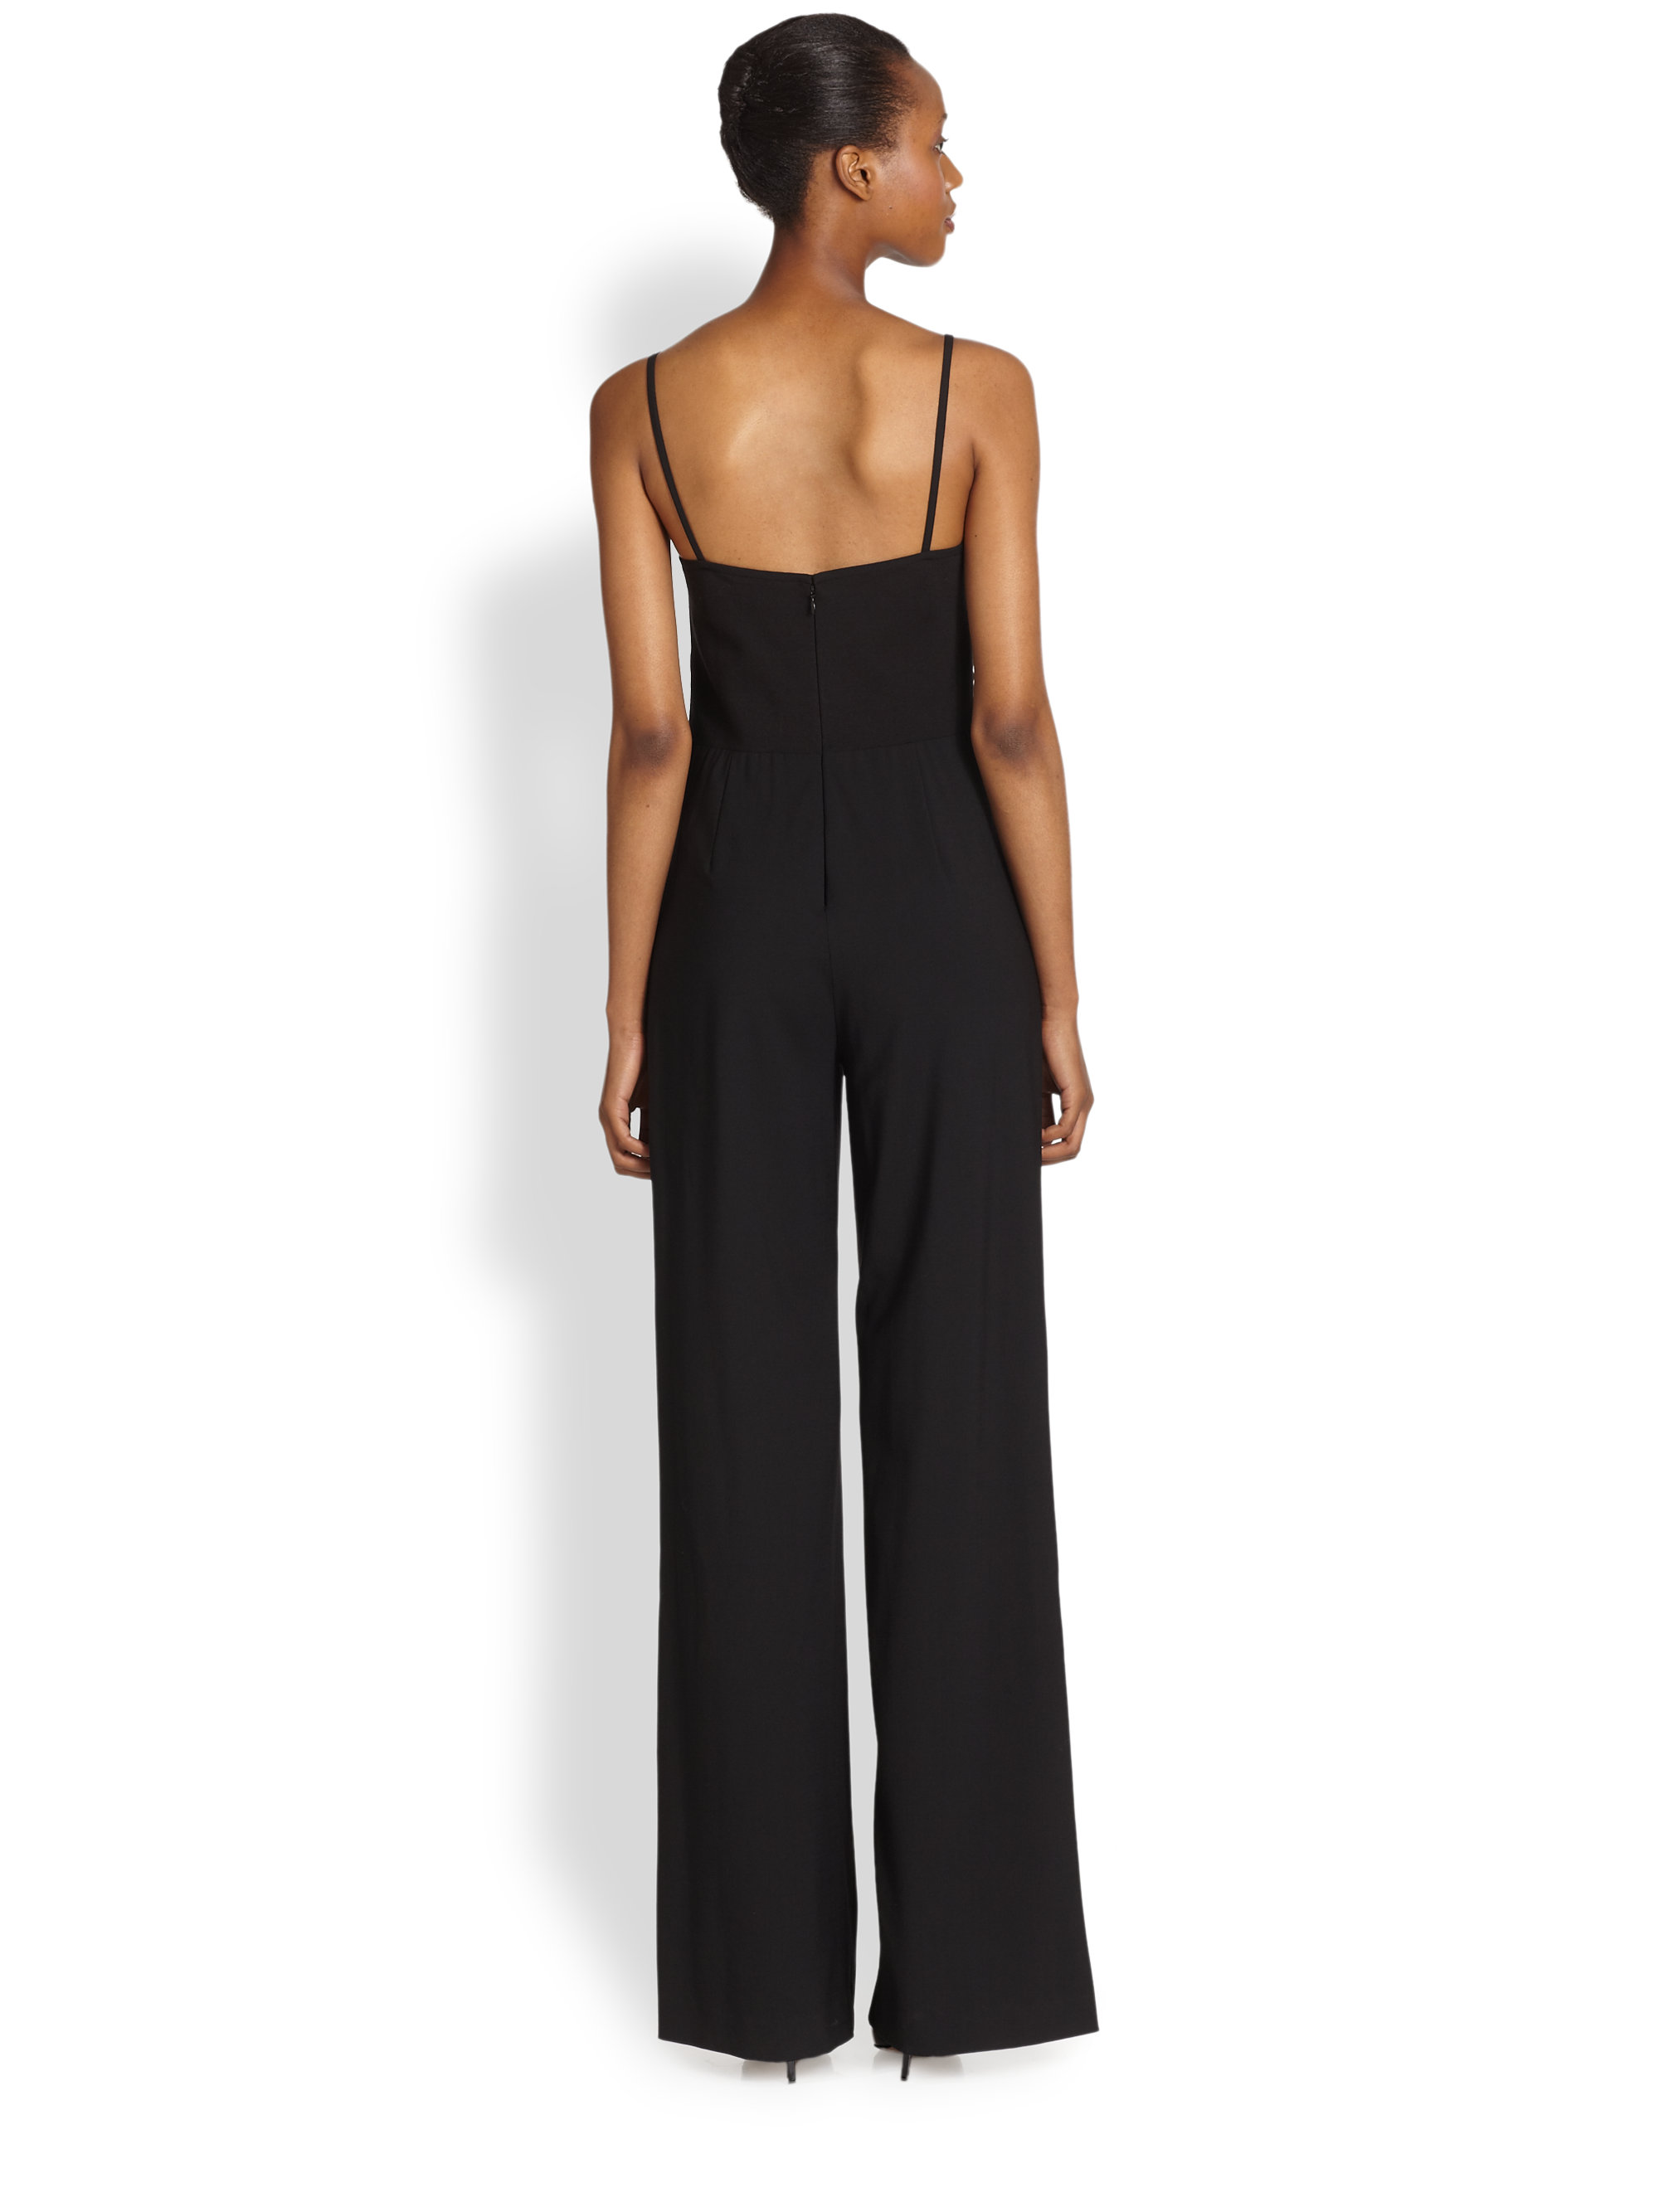 Lyst - Dkny Camisole Jumpsuit in Black